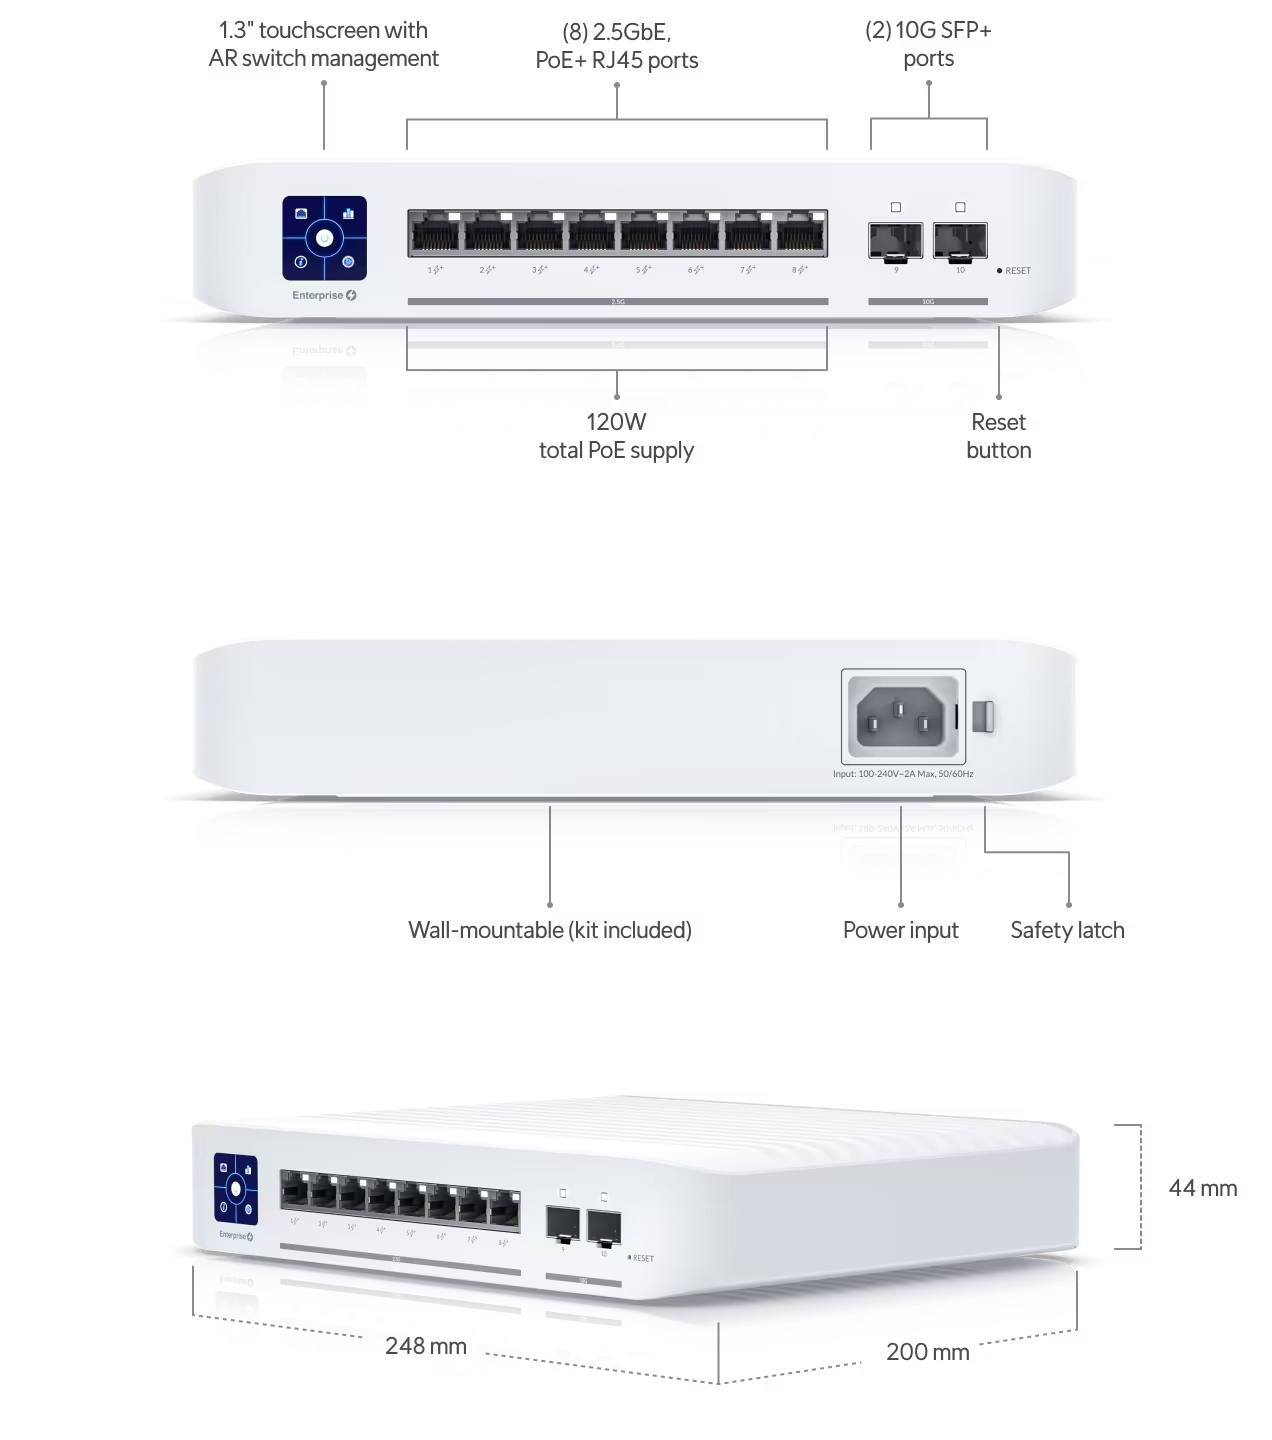 Switches-Ubiquiti-Networks-Enterprise-8-Port-2-5GbE-PoE-Switch-with-2x-10G-SFP-Ports-1